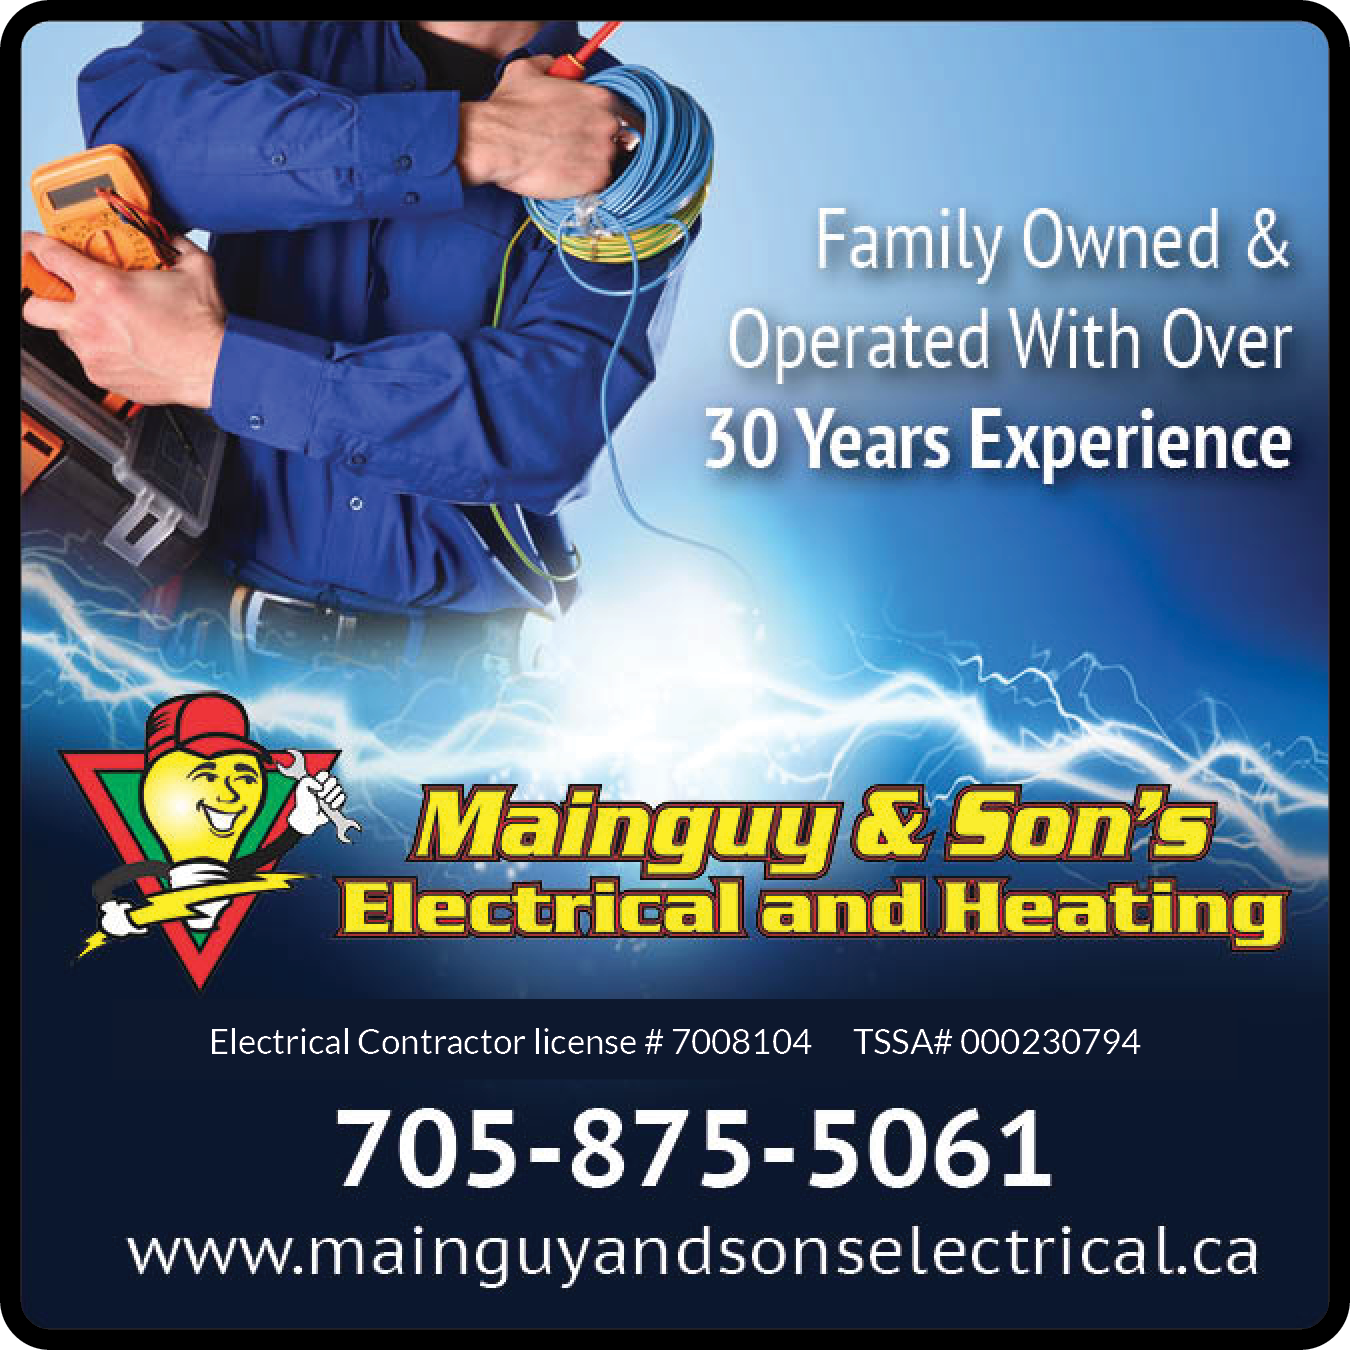 Mainguy & Son's Electrical & Heating